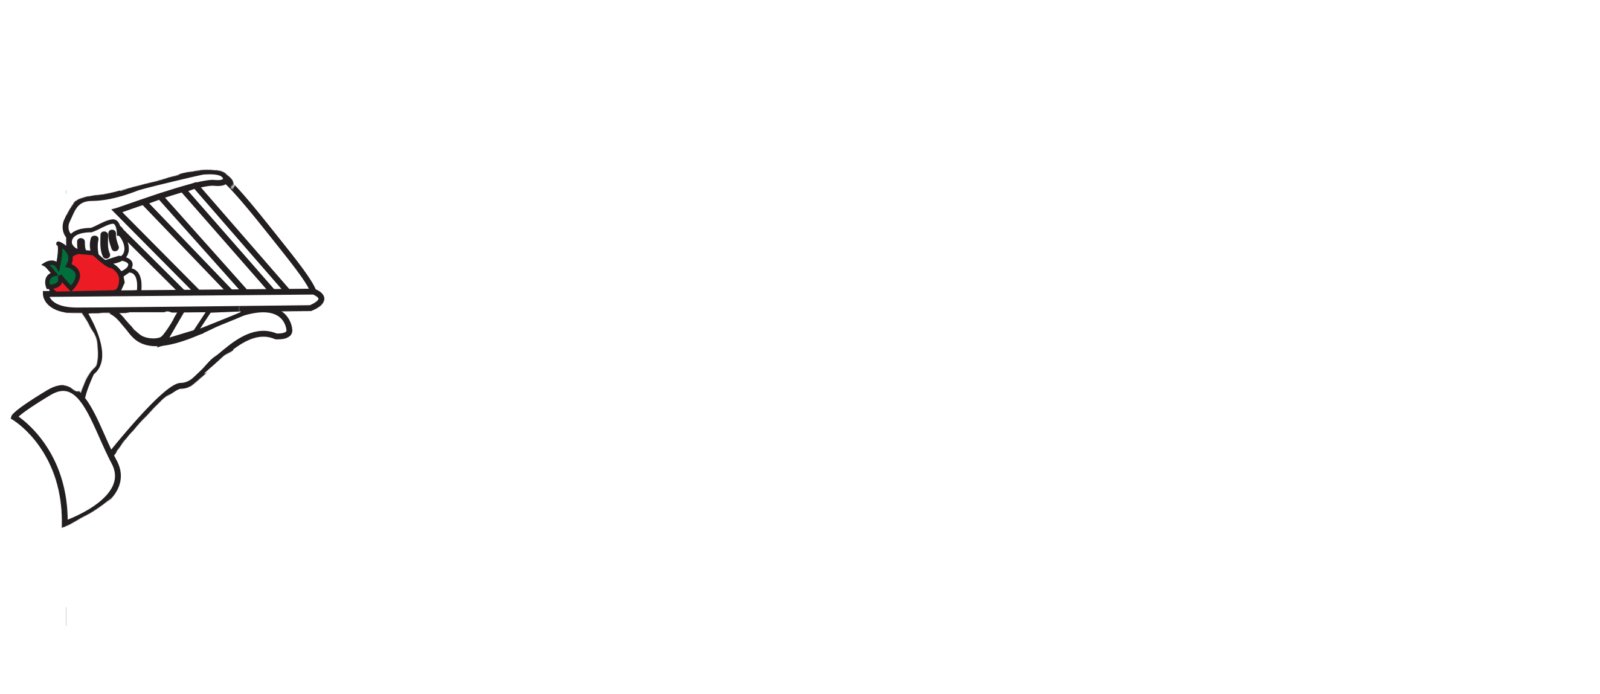 Michael's Cafe and Bakery Logo